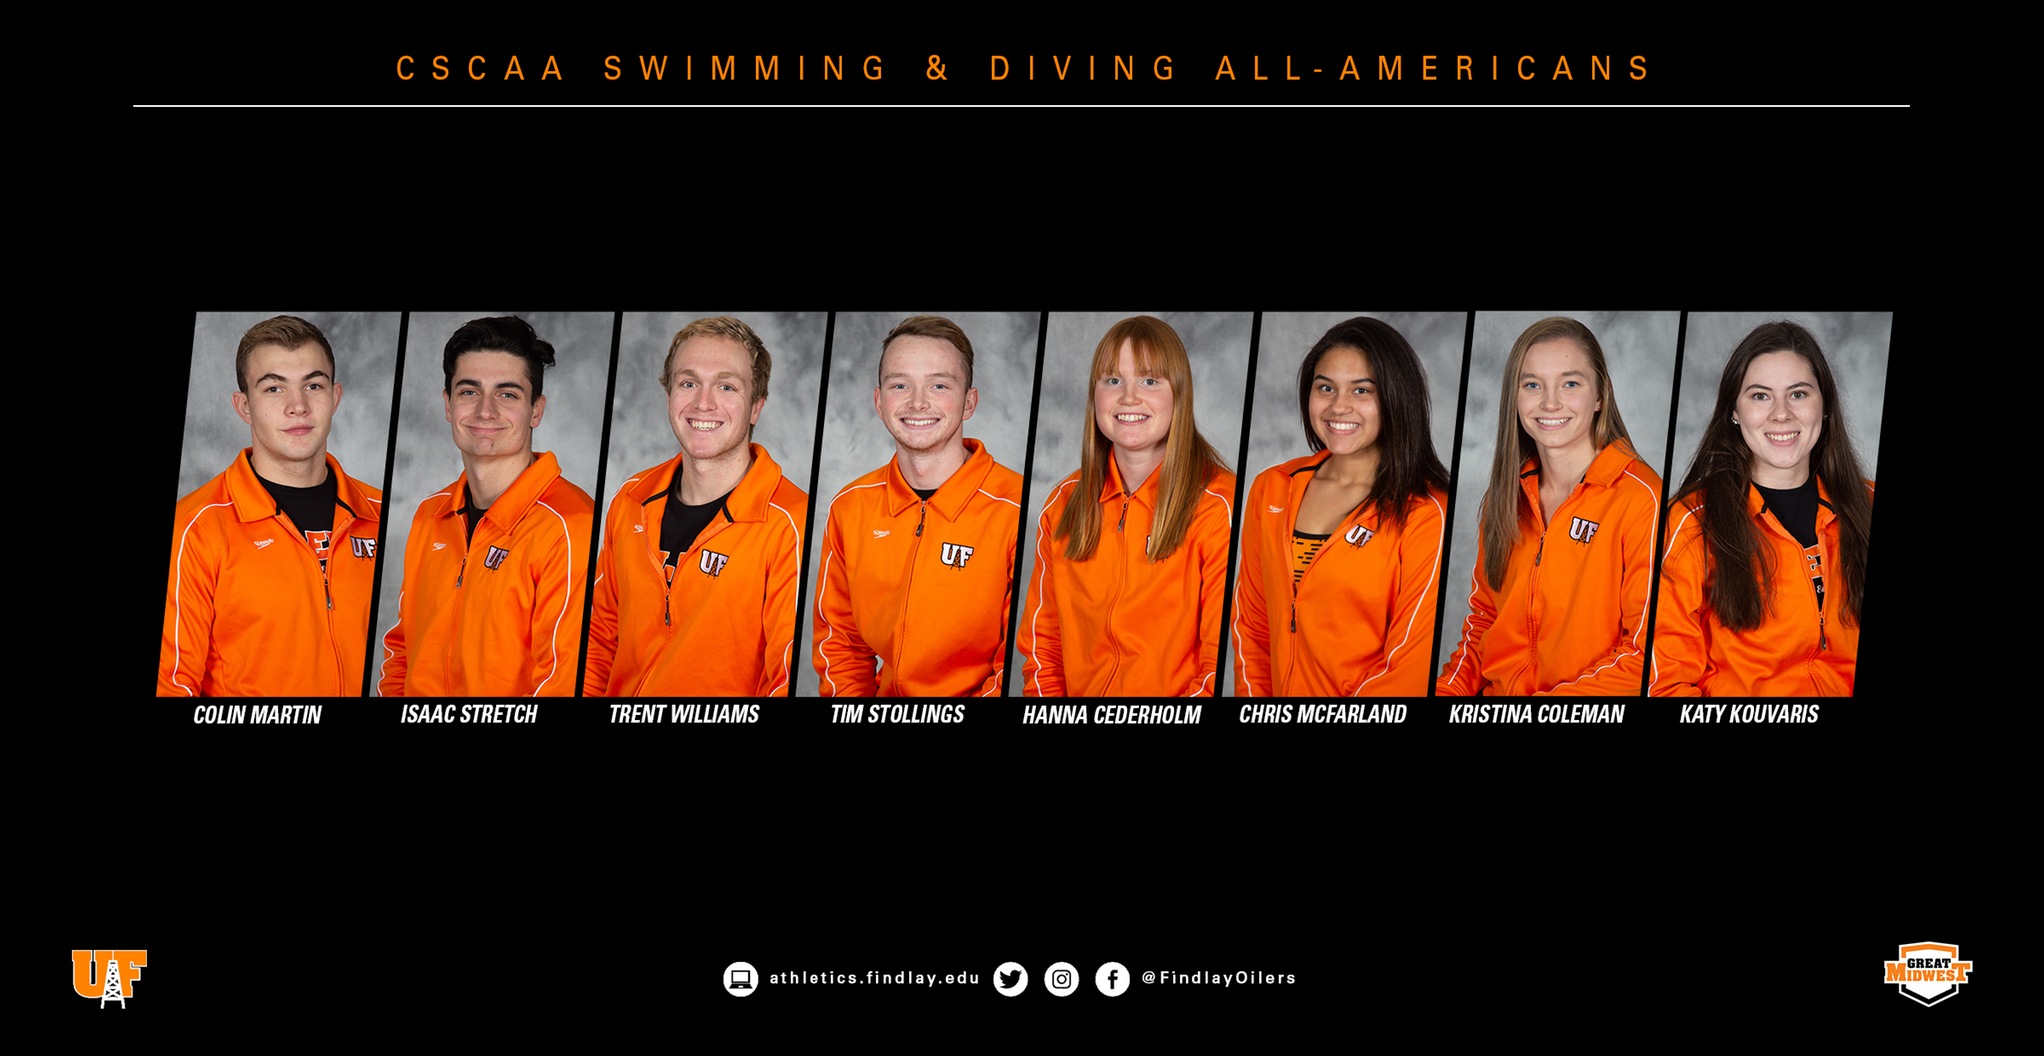 8 Oilers Earn All-American Honors from the CSCAA